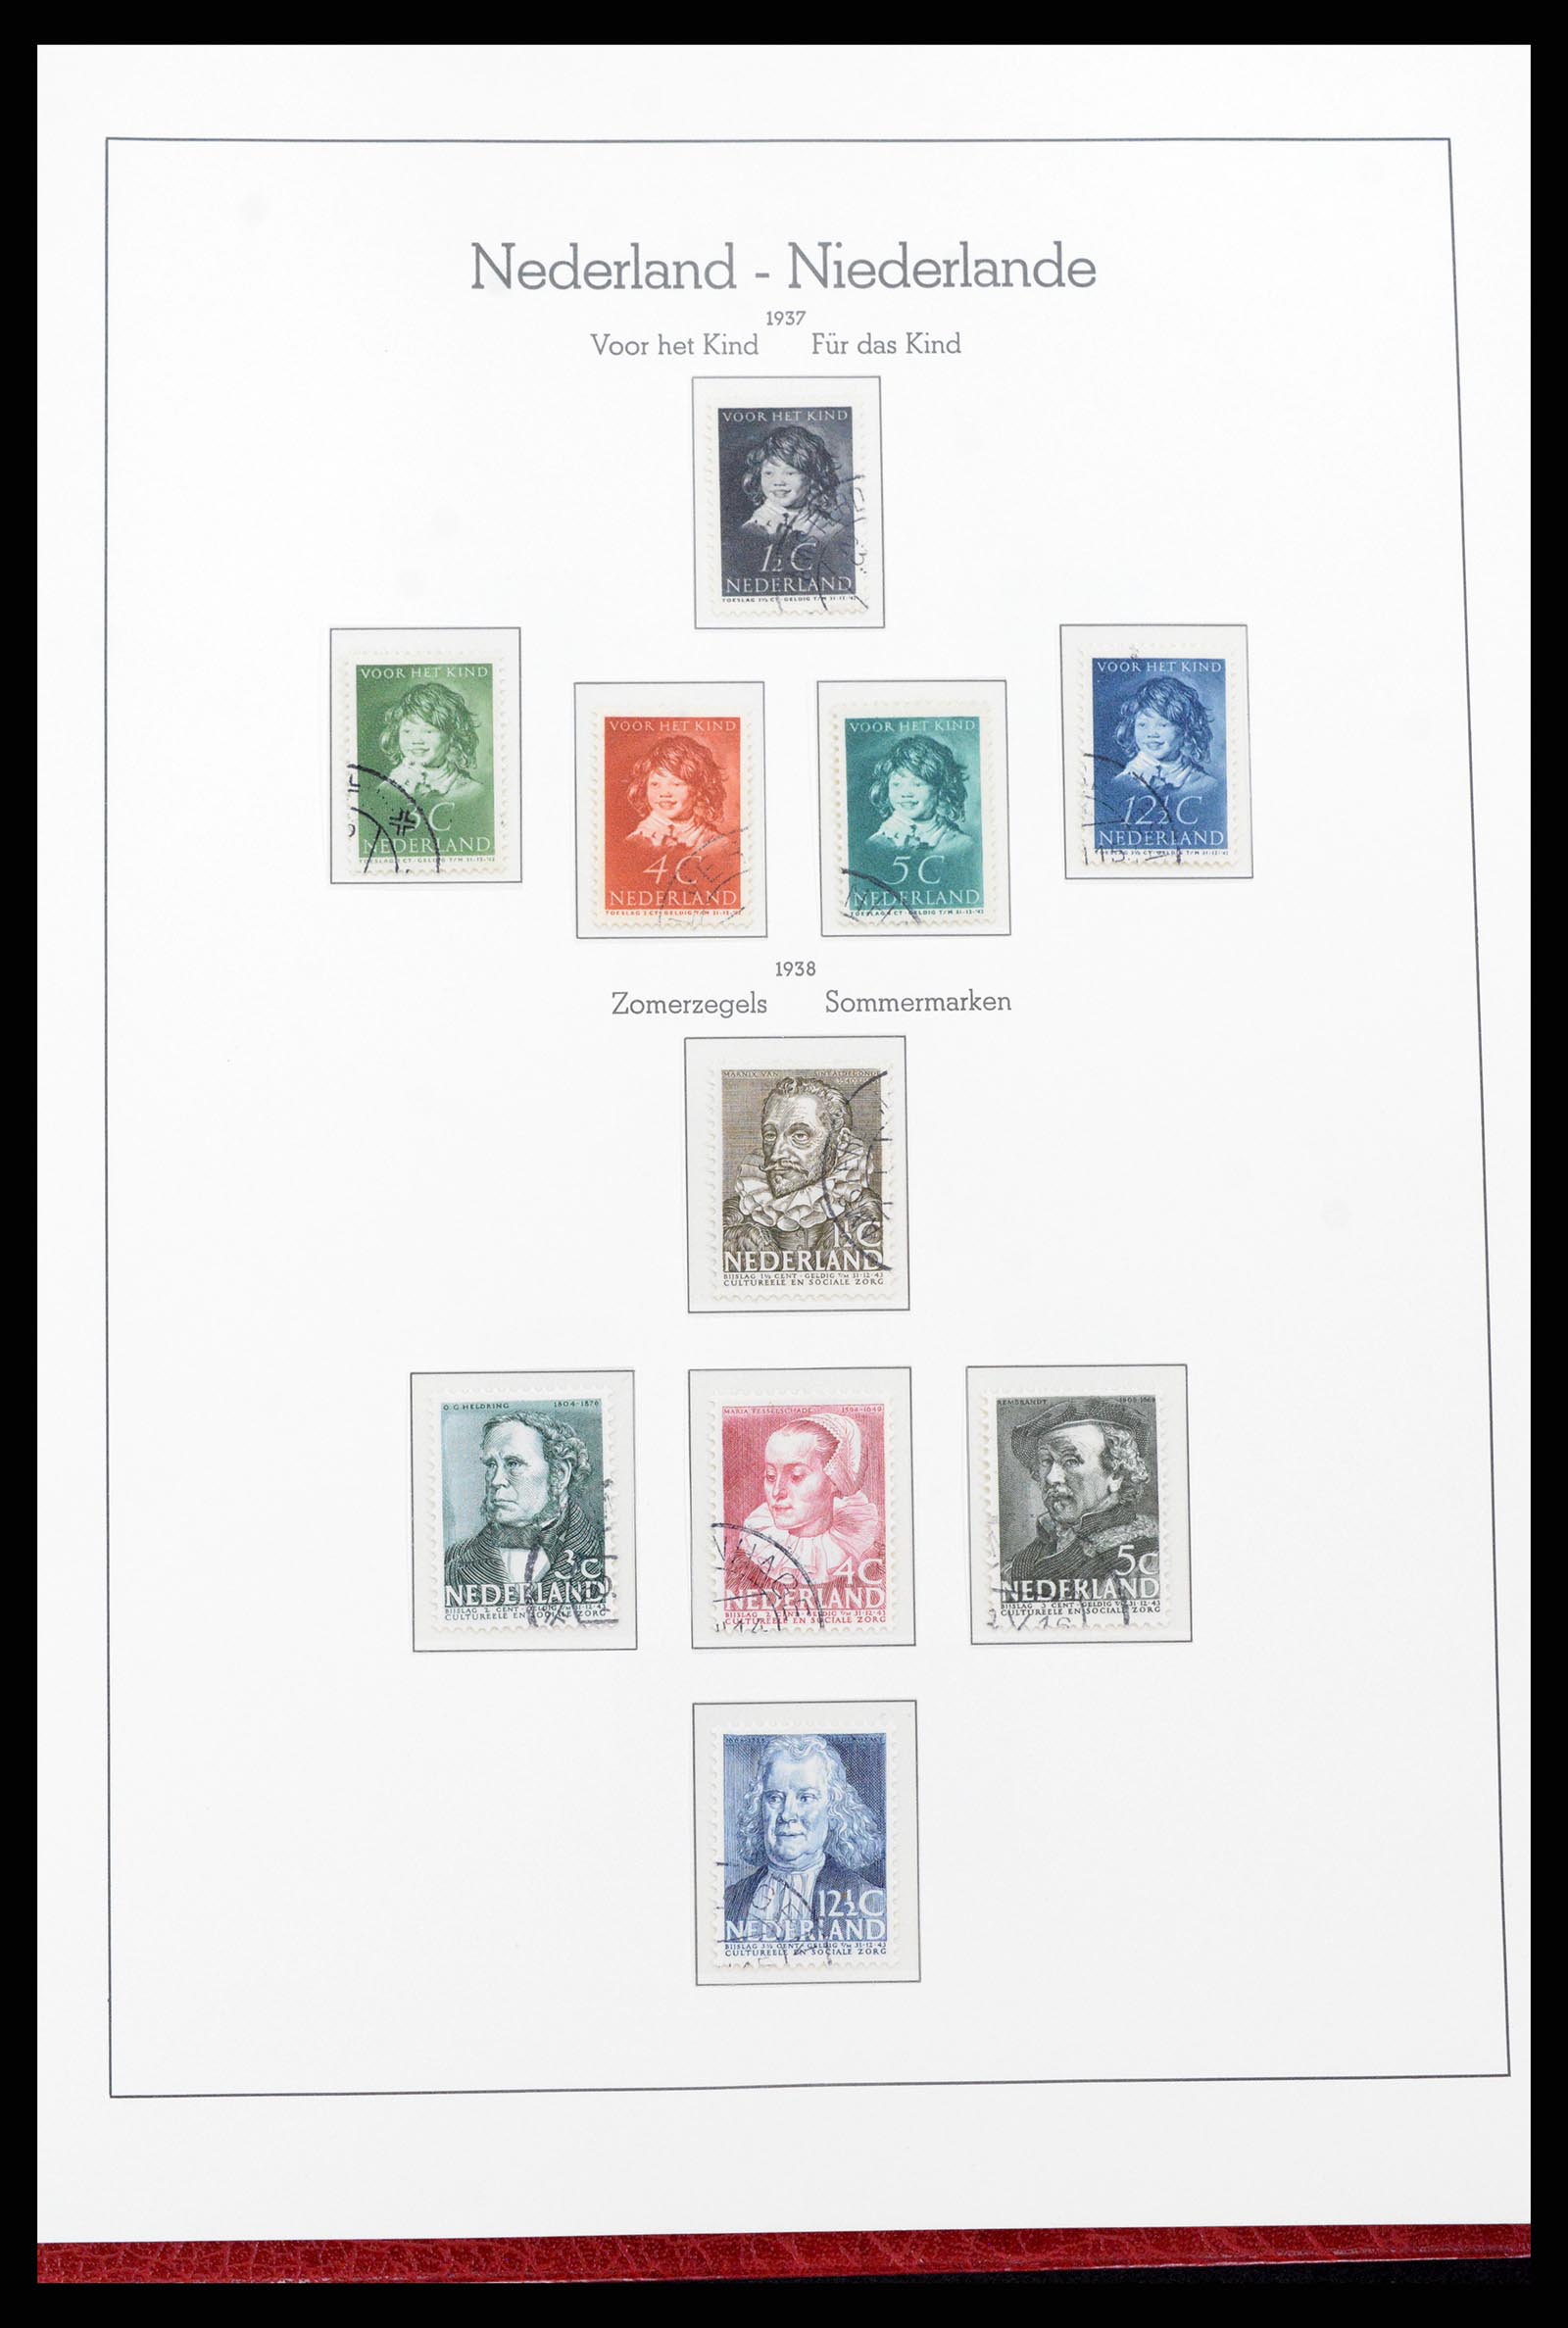 37290 023 - Stamp collection 37290 Netherlands 1852-1945.